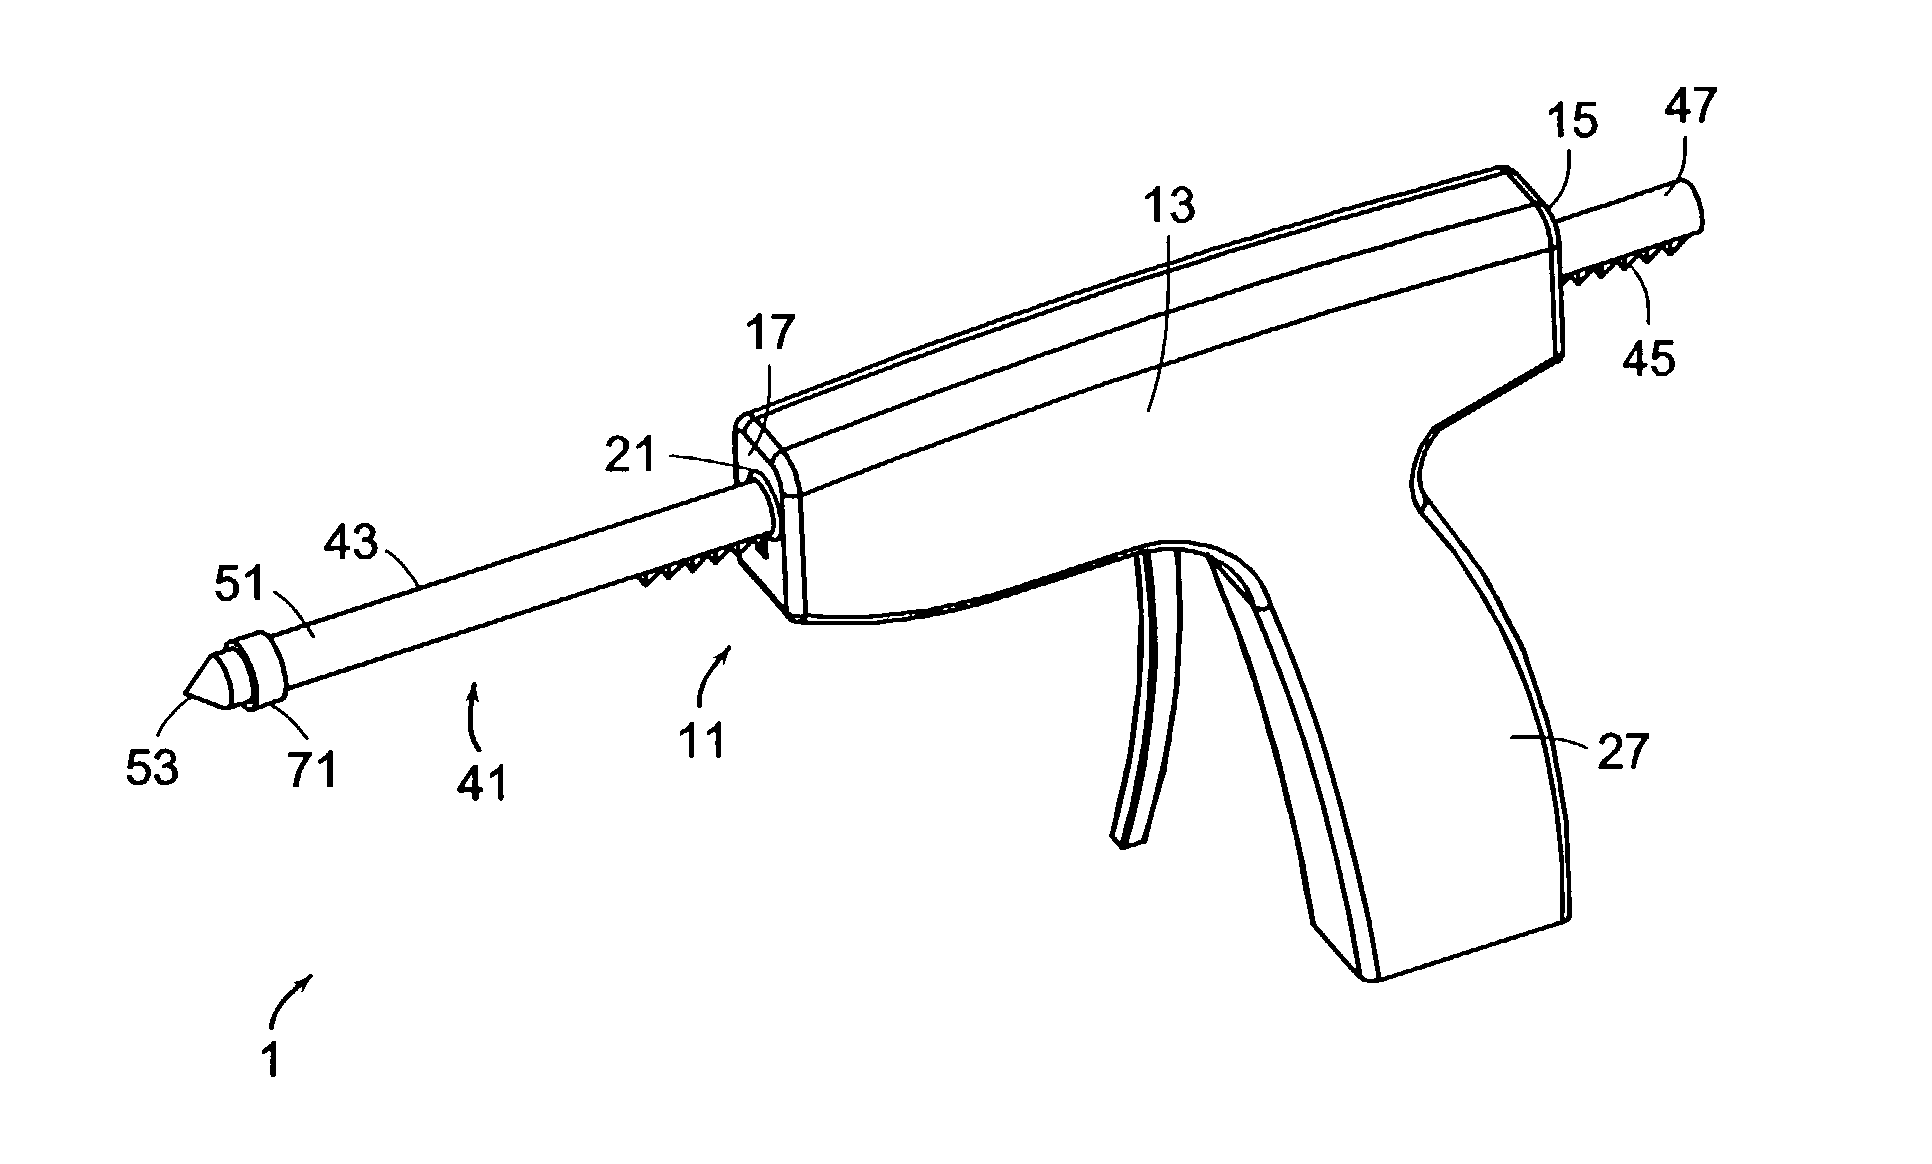 Device for advancing a functional element through tissue